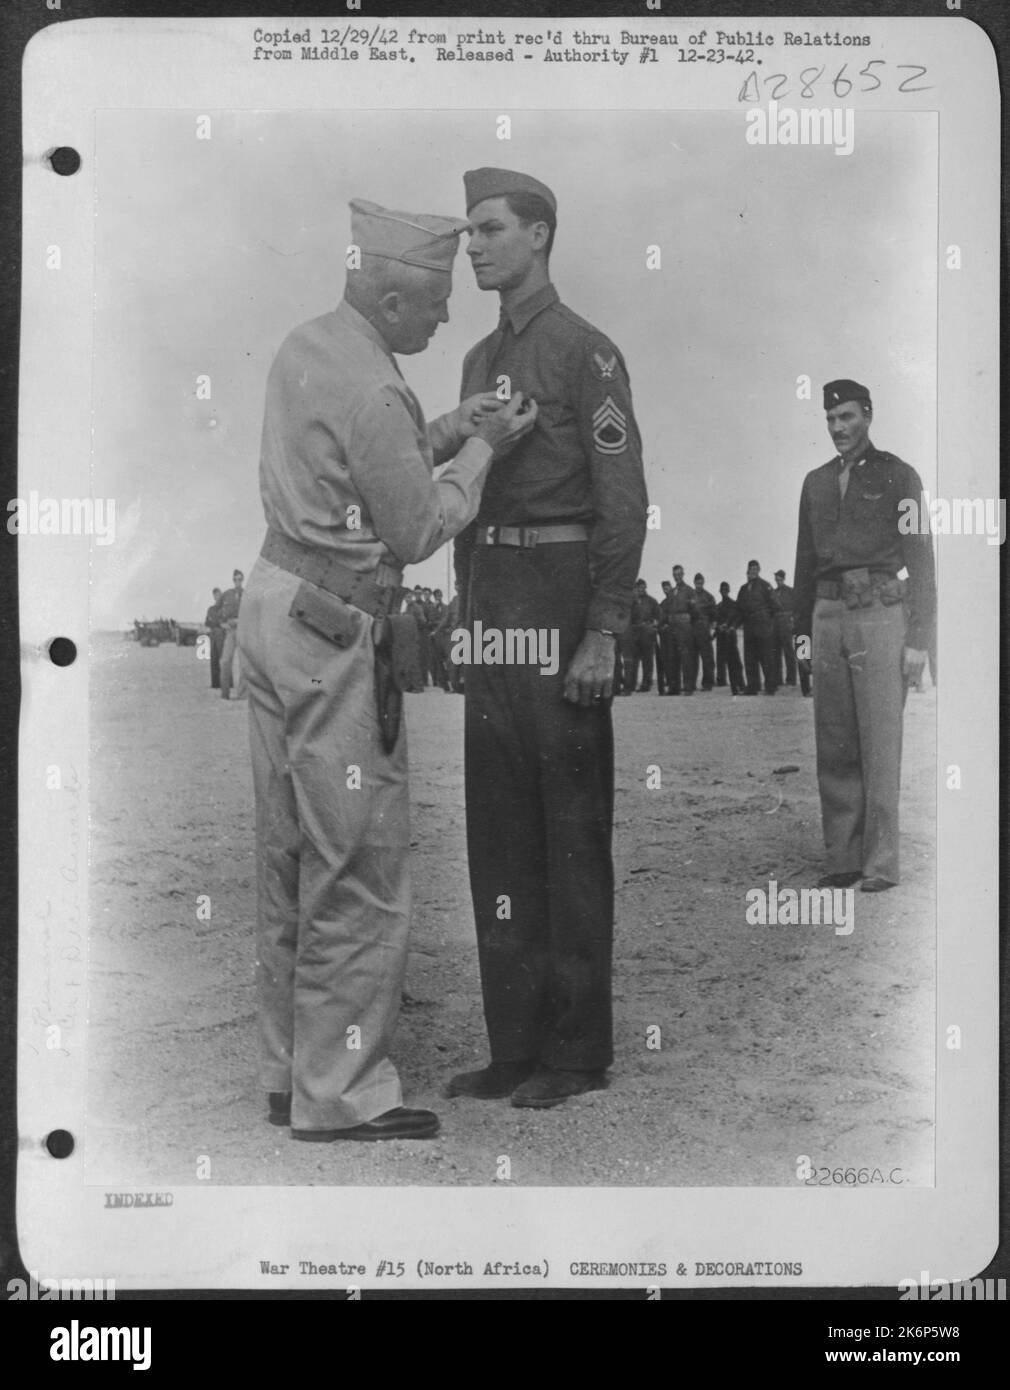 Cited for gallantry in action while acting as aerial gunner, T/Sgt. Marvin L. Breeding was presented the Order of the Purple Heart for wounds sustained while participating in combat with enemy aircraft, and also the Silver Star for remaining at his Stock Photo